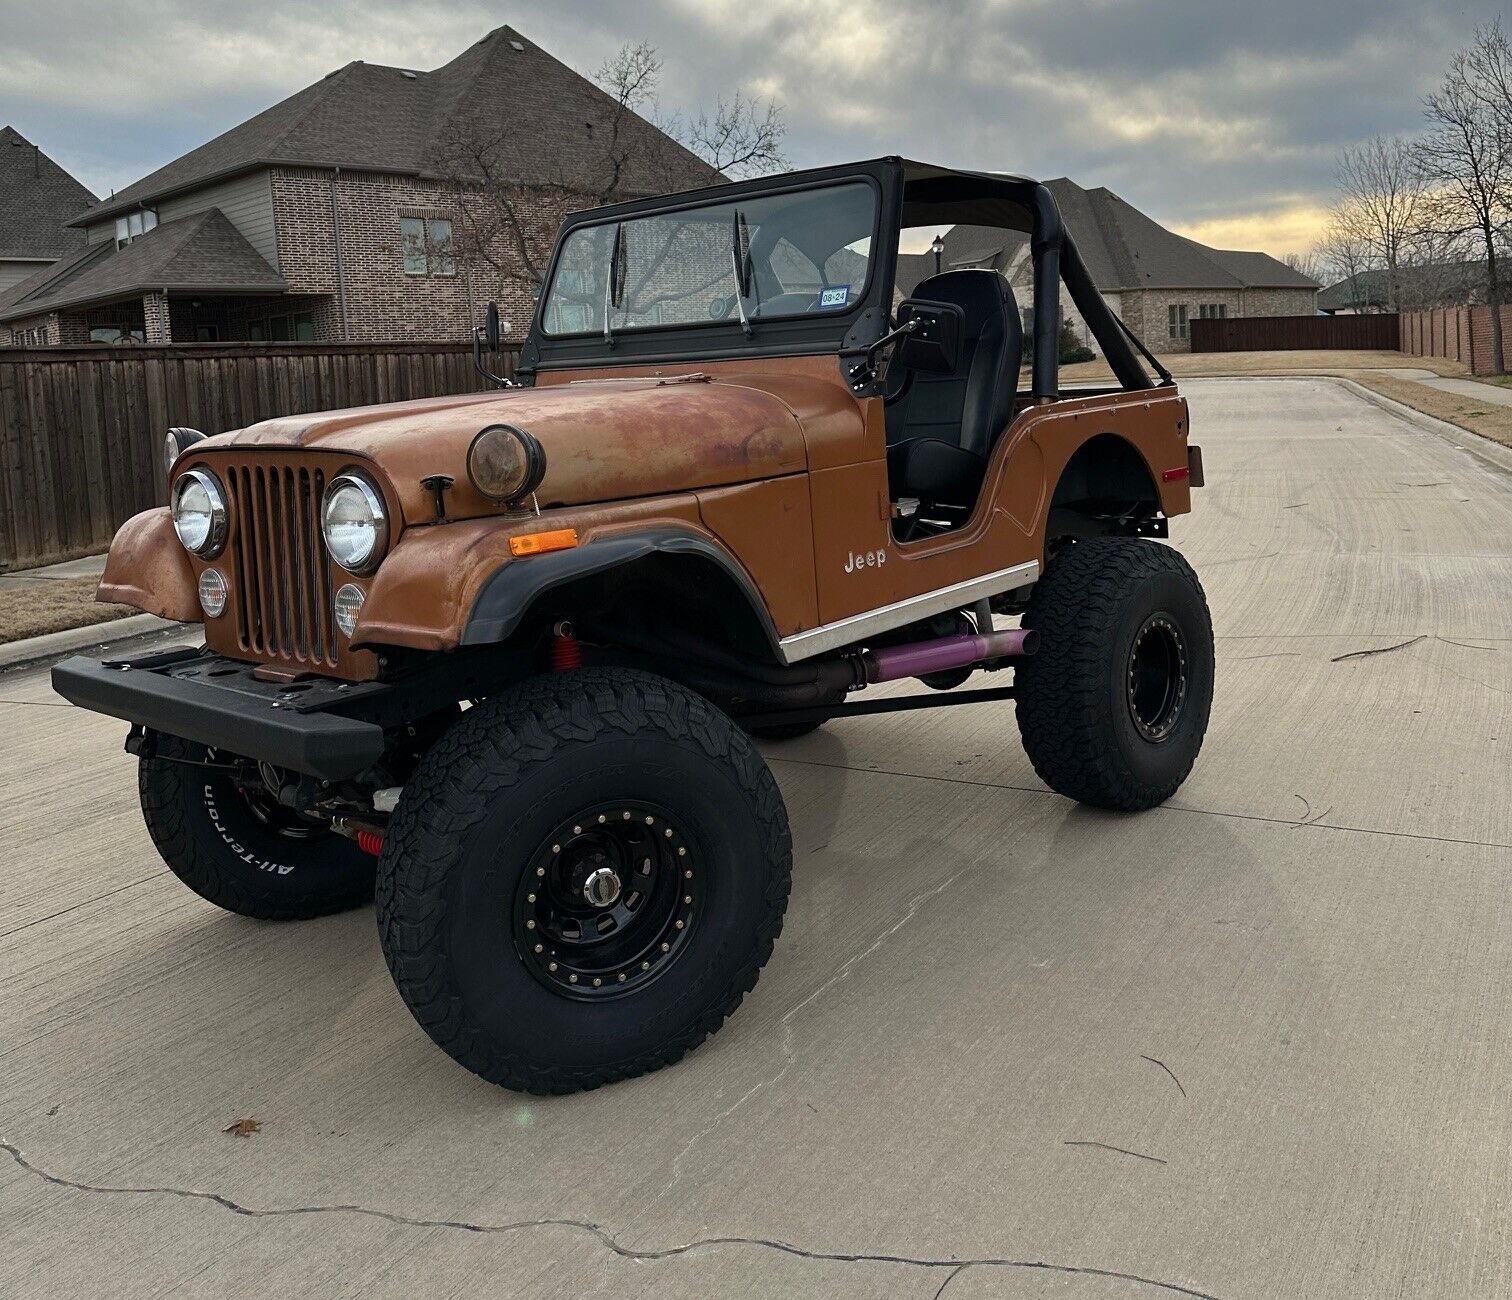 This is a 1978 Jeep CJ5 with an AMC 360 motor and th400 transmission.